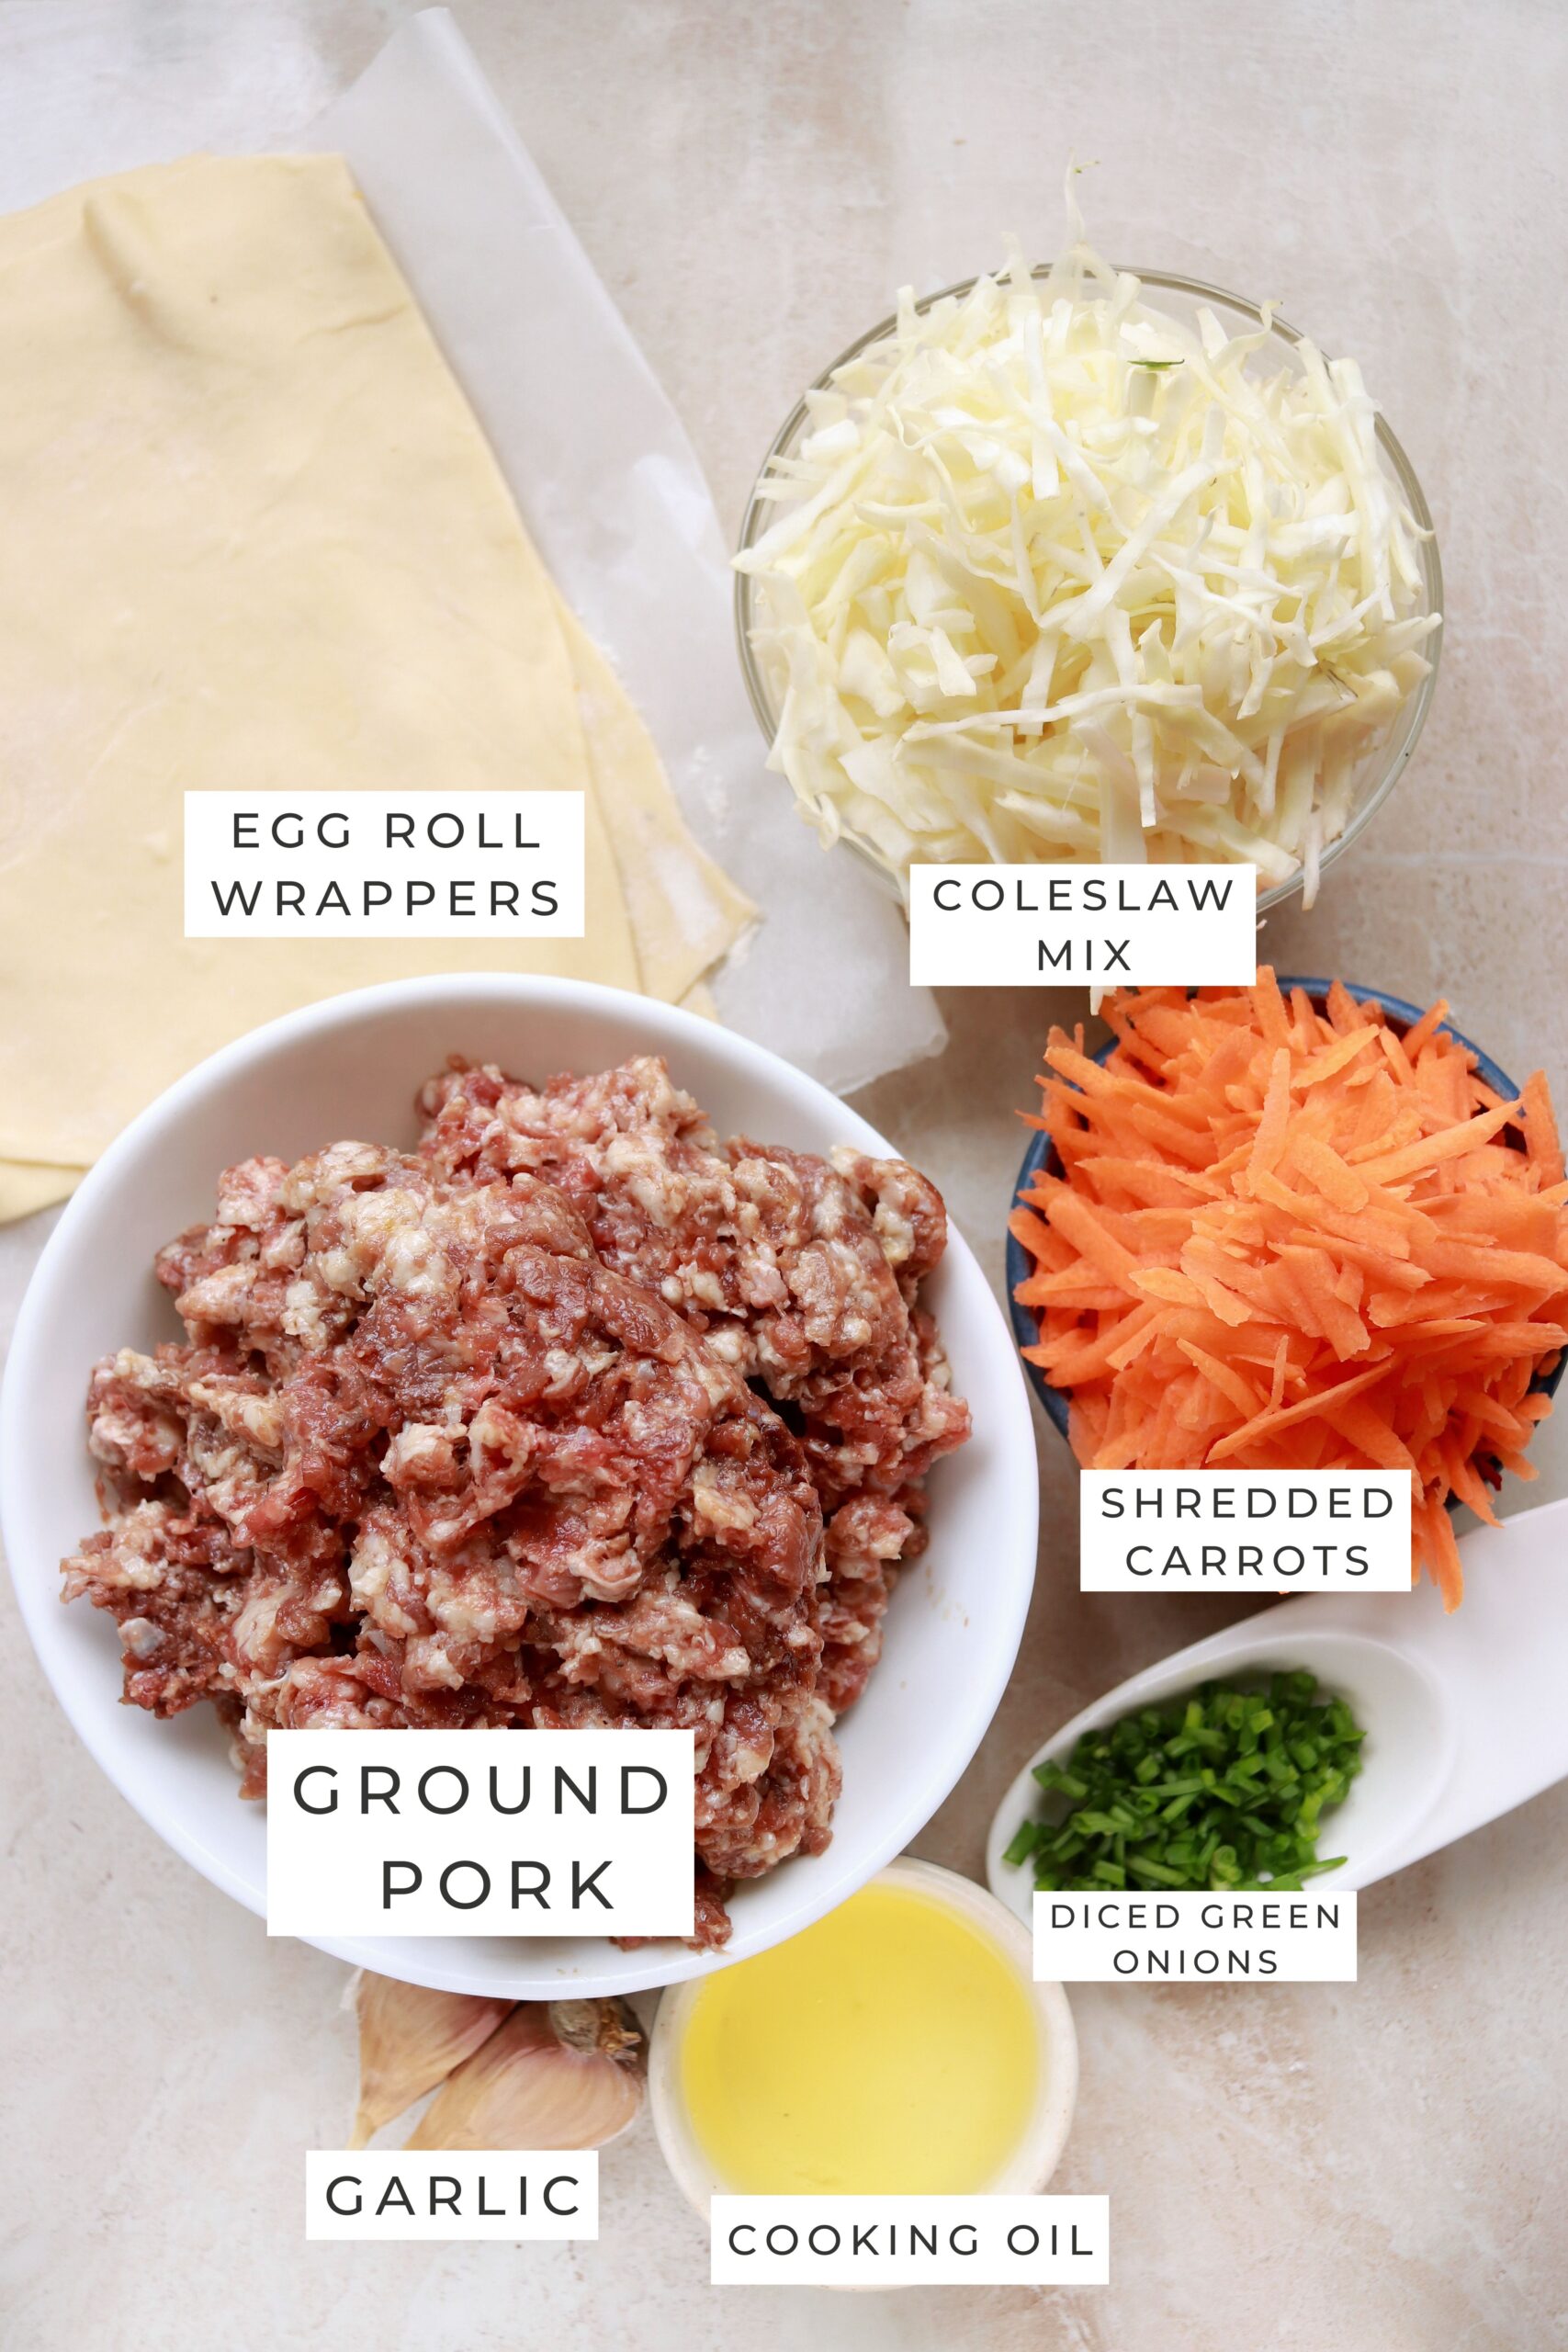 Labeled ingredients for the egg rolls.